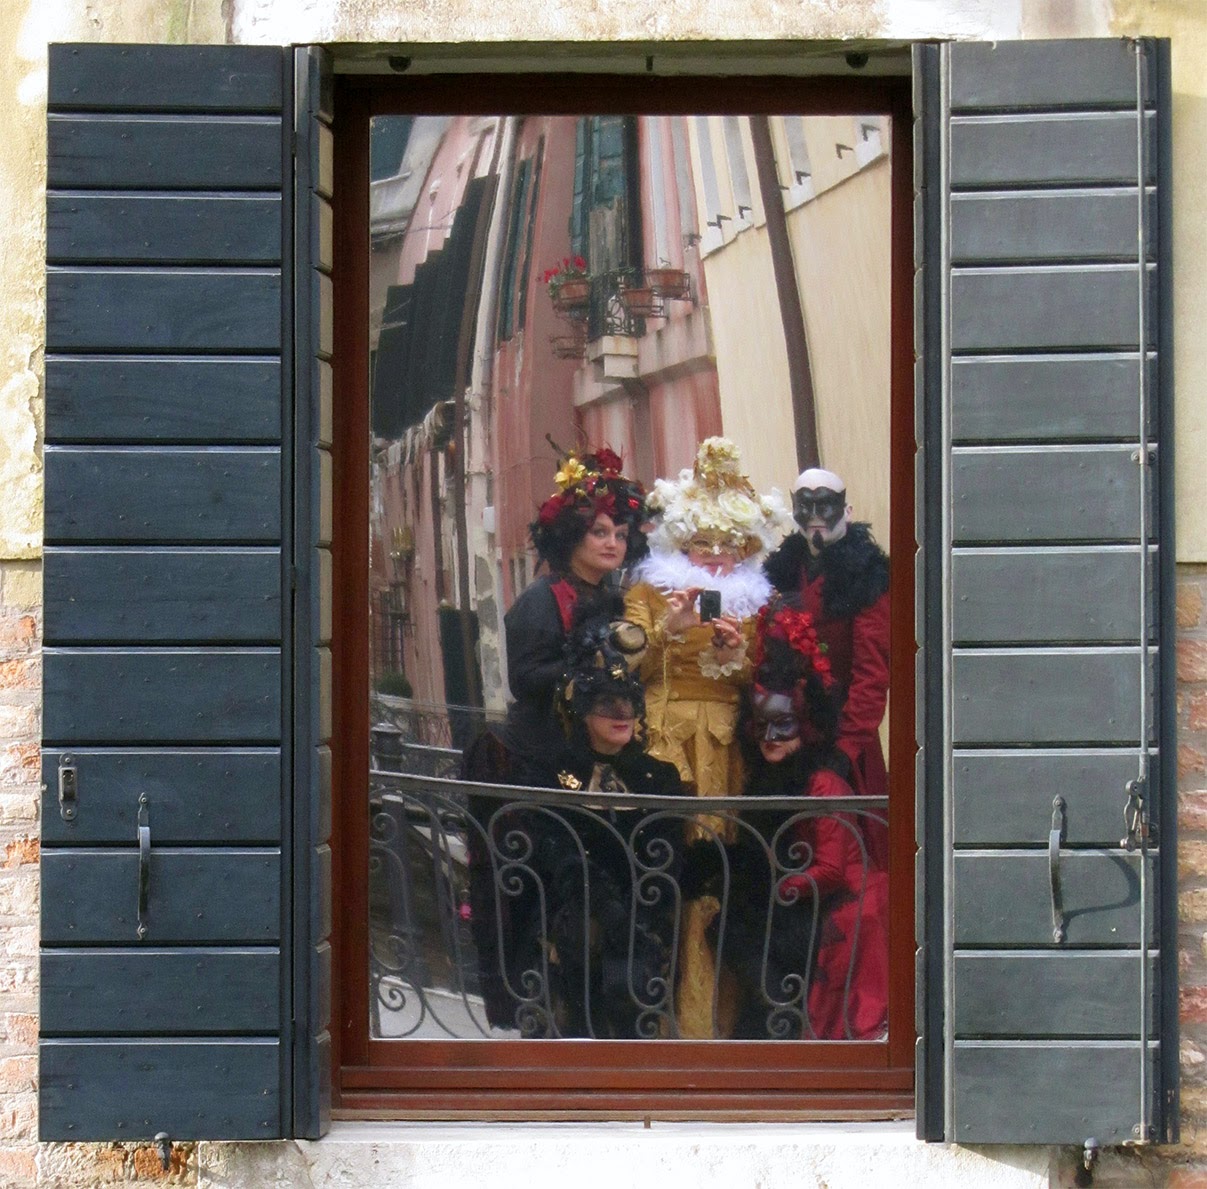 costumed us reflected in window